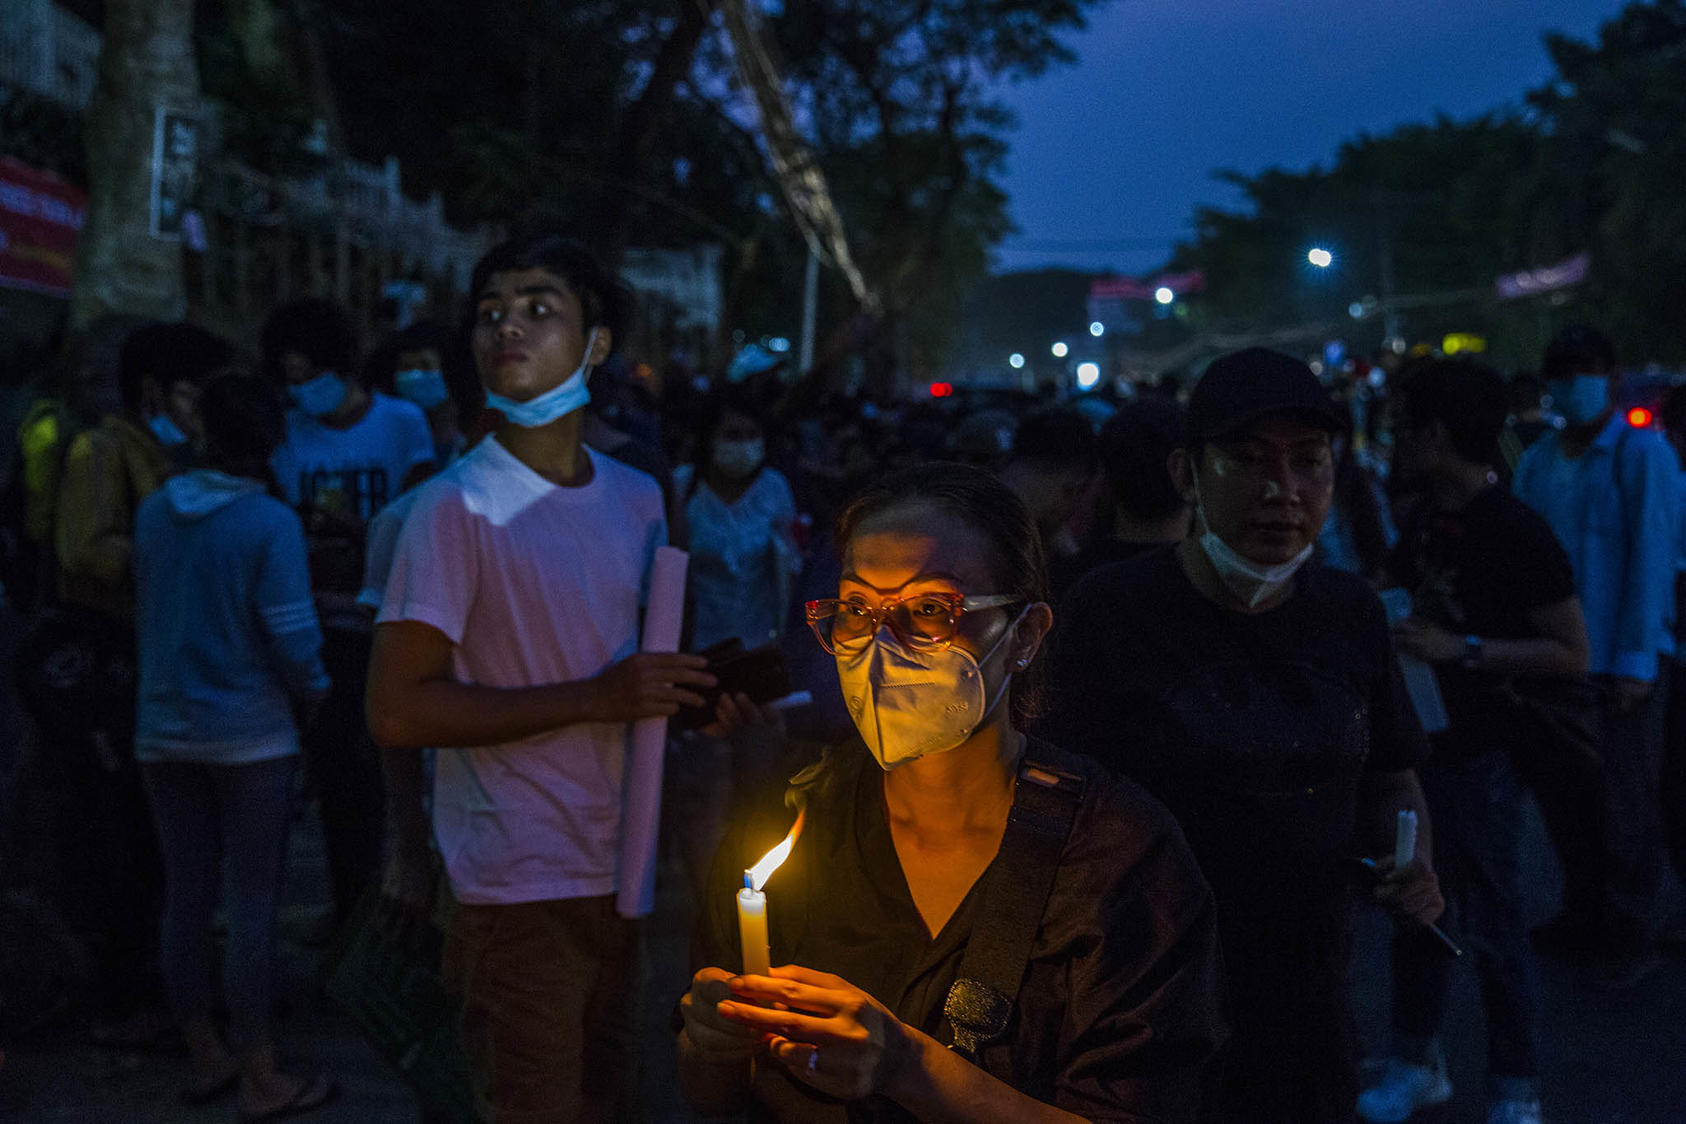 Protestors hold a candlelight vigil for the victims who died in recent government crackdowns while demonstrating against the military coup, at the U.S. embassy in Yangon, Myanmar. February 21, 2021. (The New York Times)